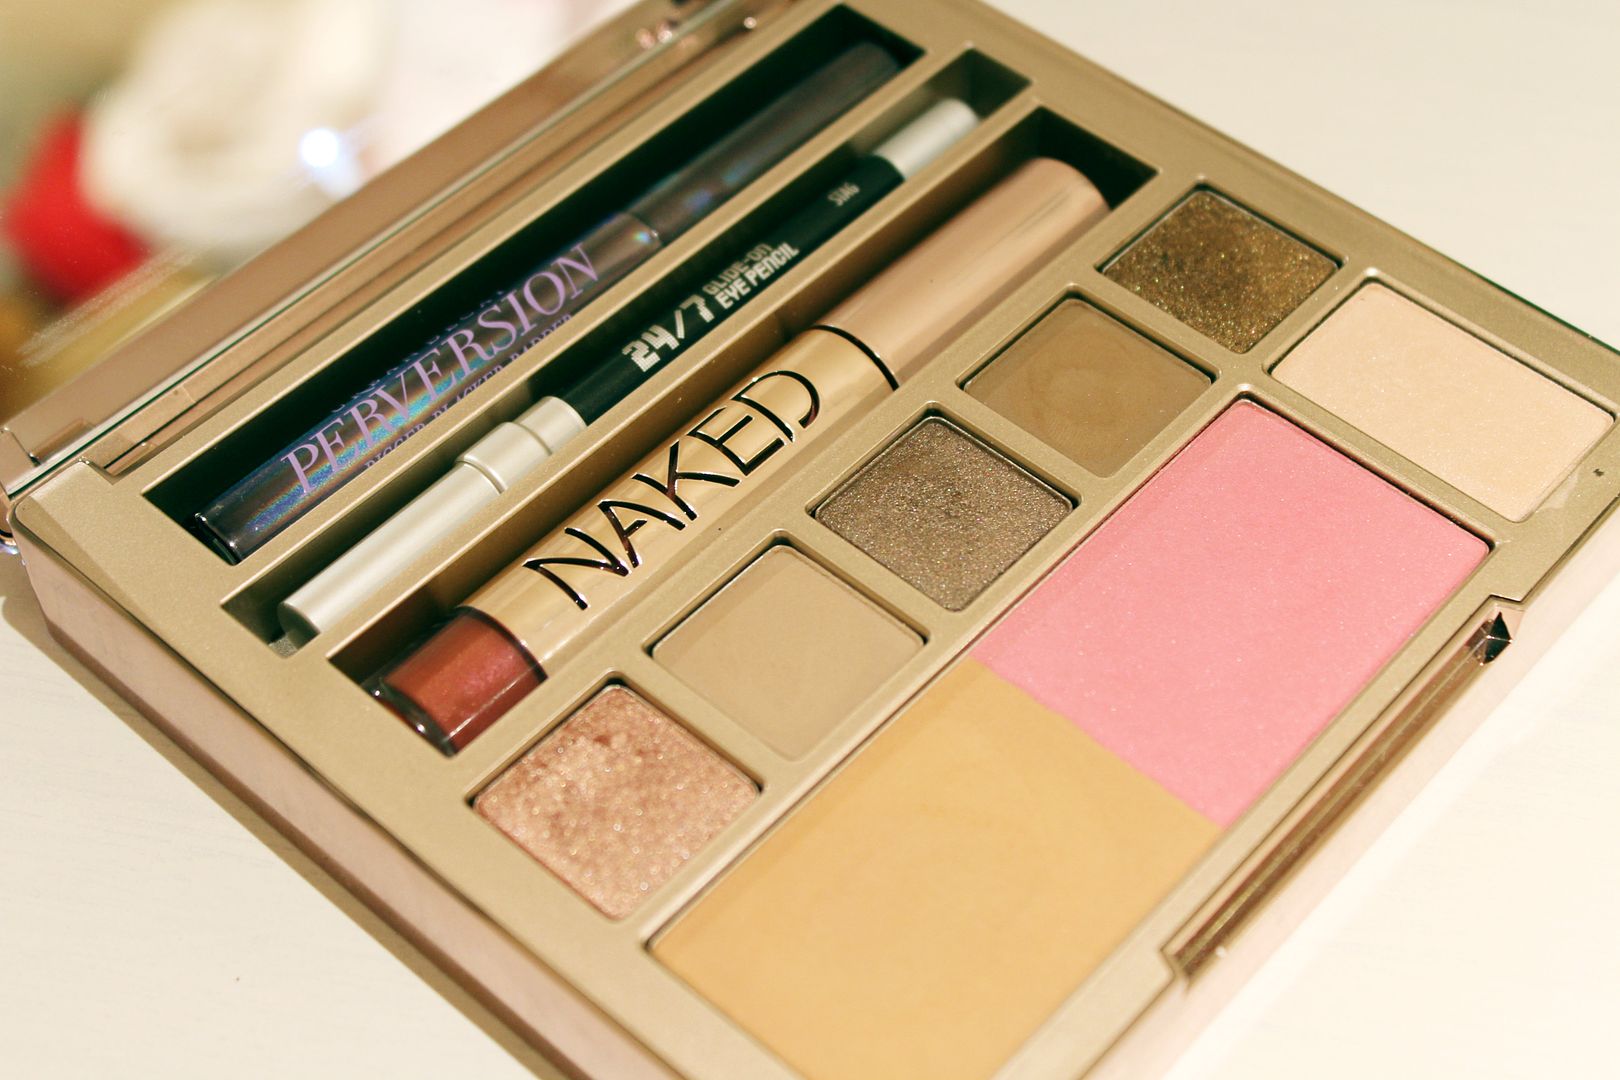 Urban Decay Naked On The Run Palette Review Inside the Palette Belle-Amie Beauty Fashion Lifestyle Blog